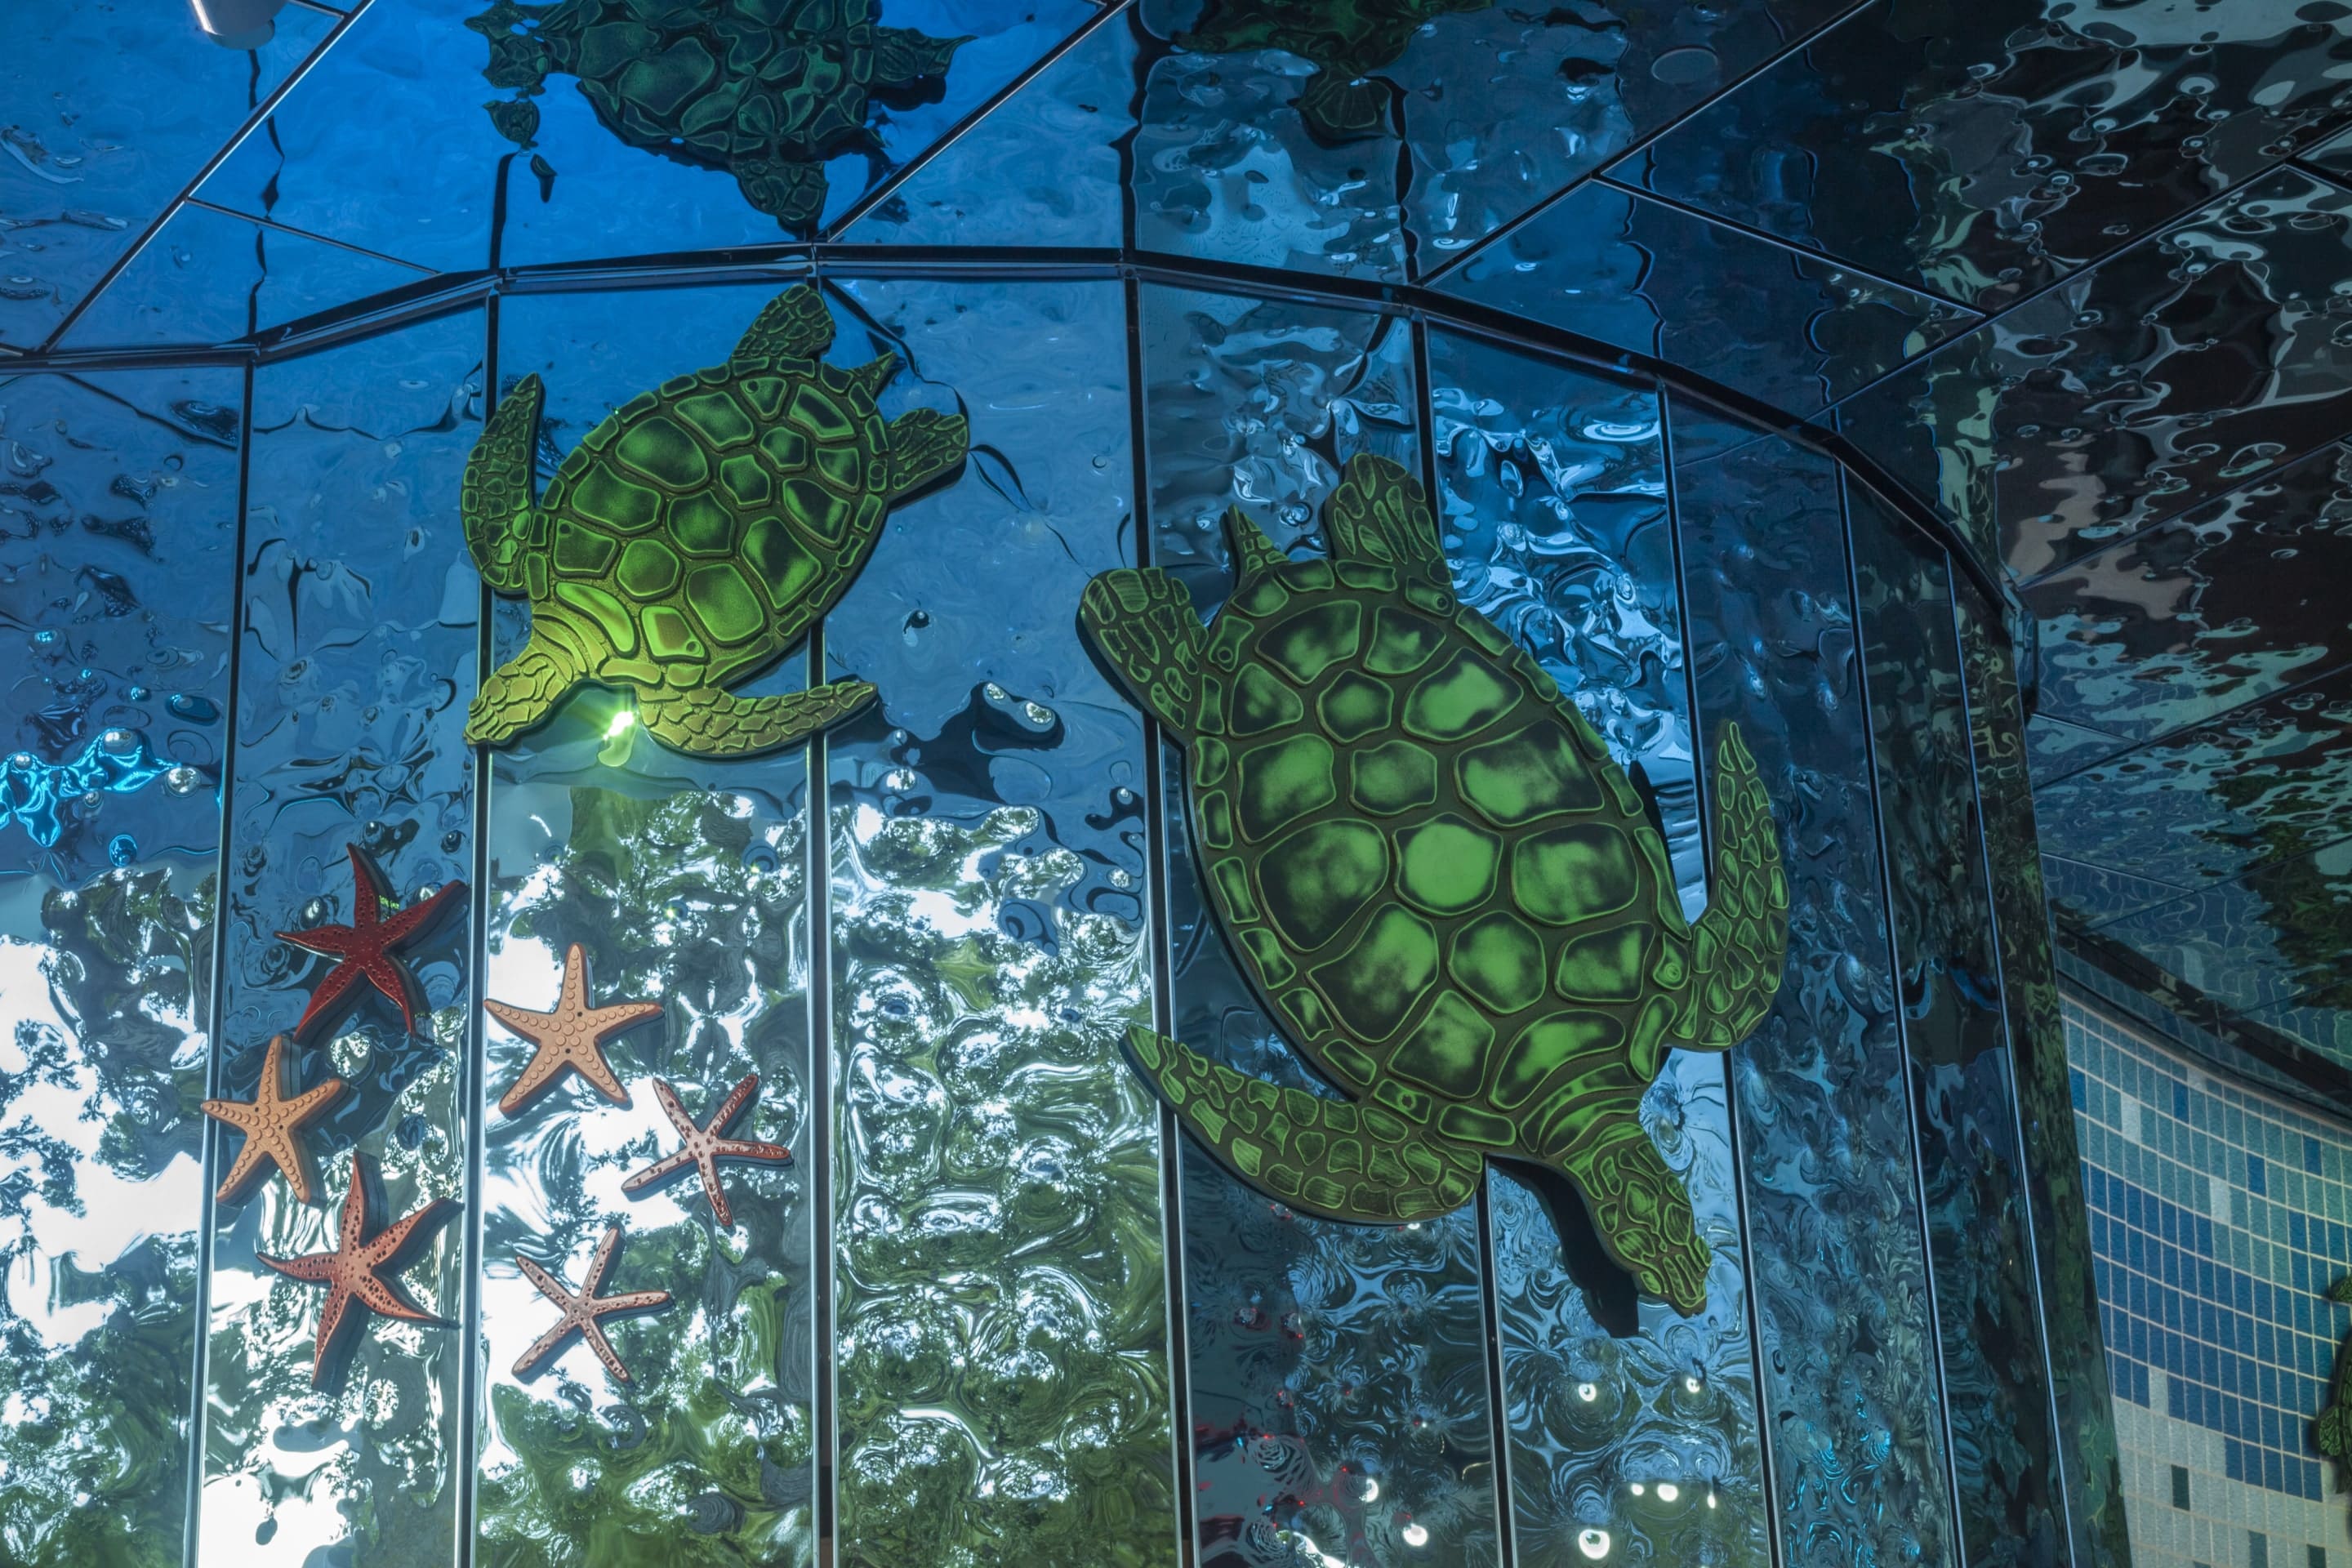 Custom milled sea turtles and starfish against the rippled blue stainless steel cladding.